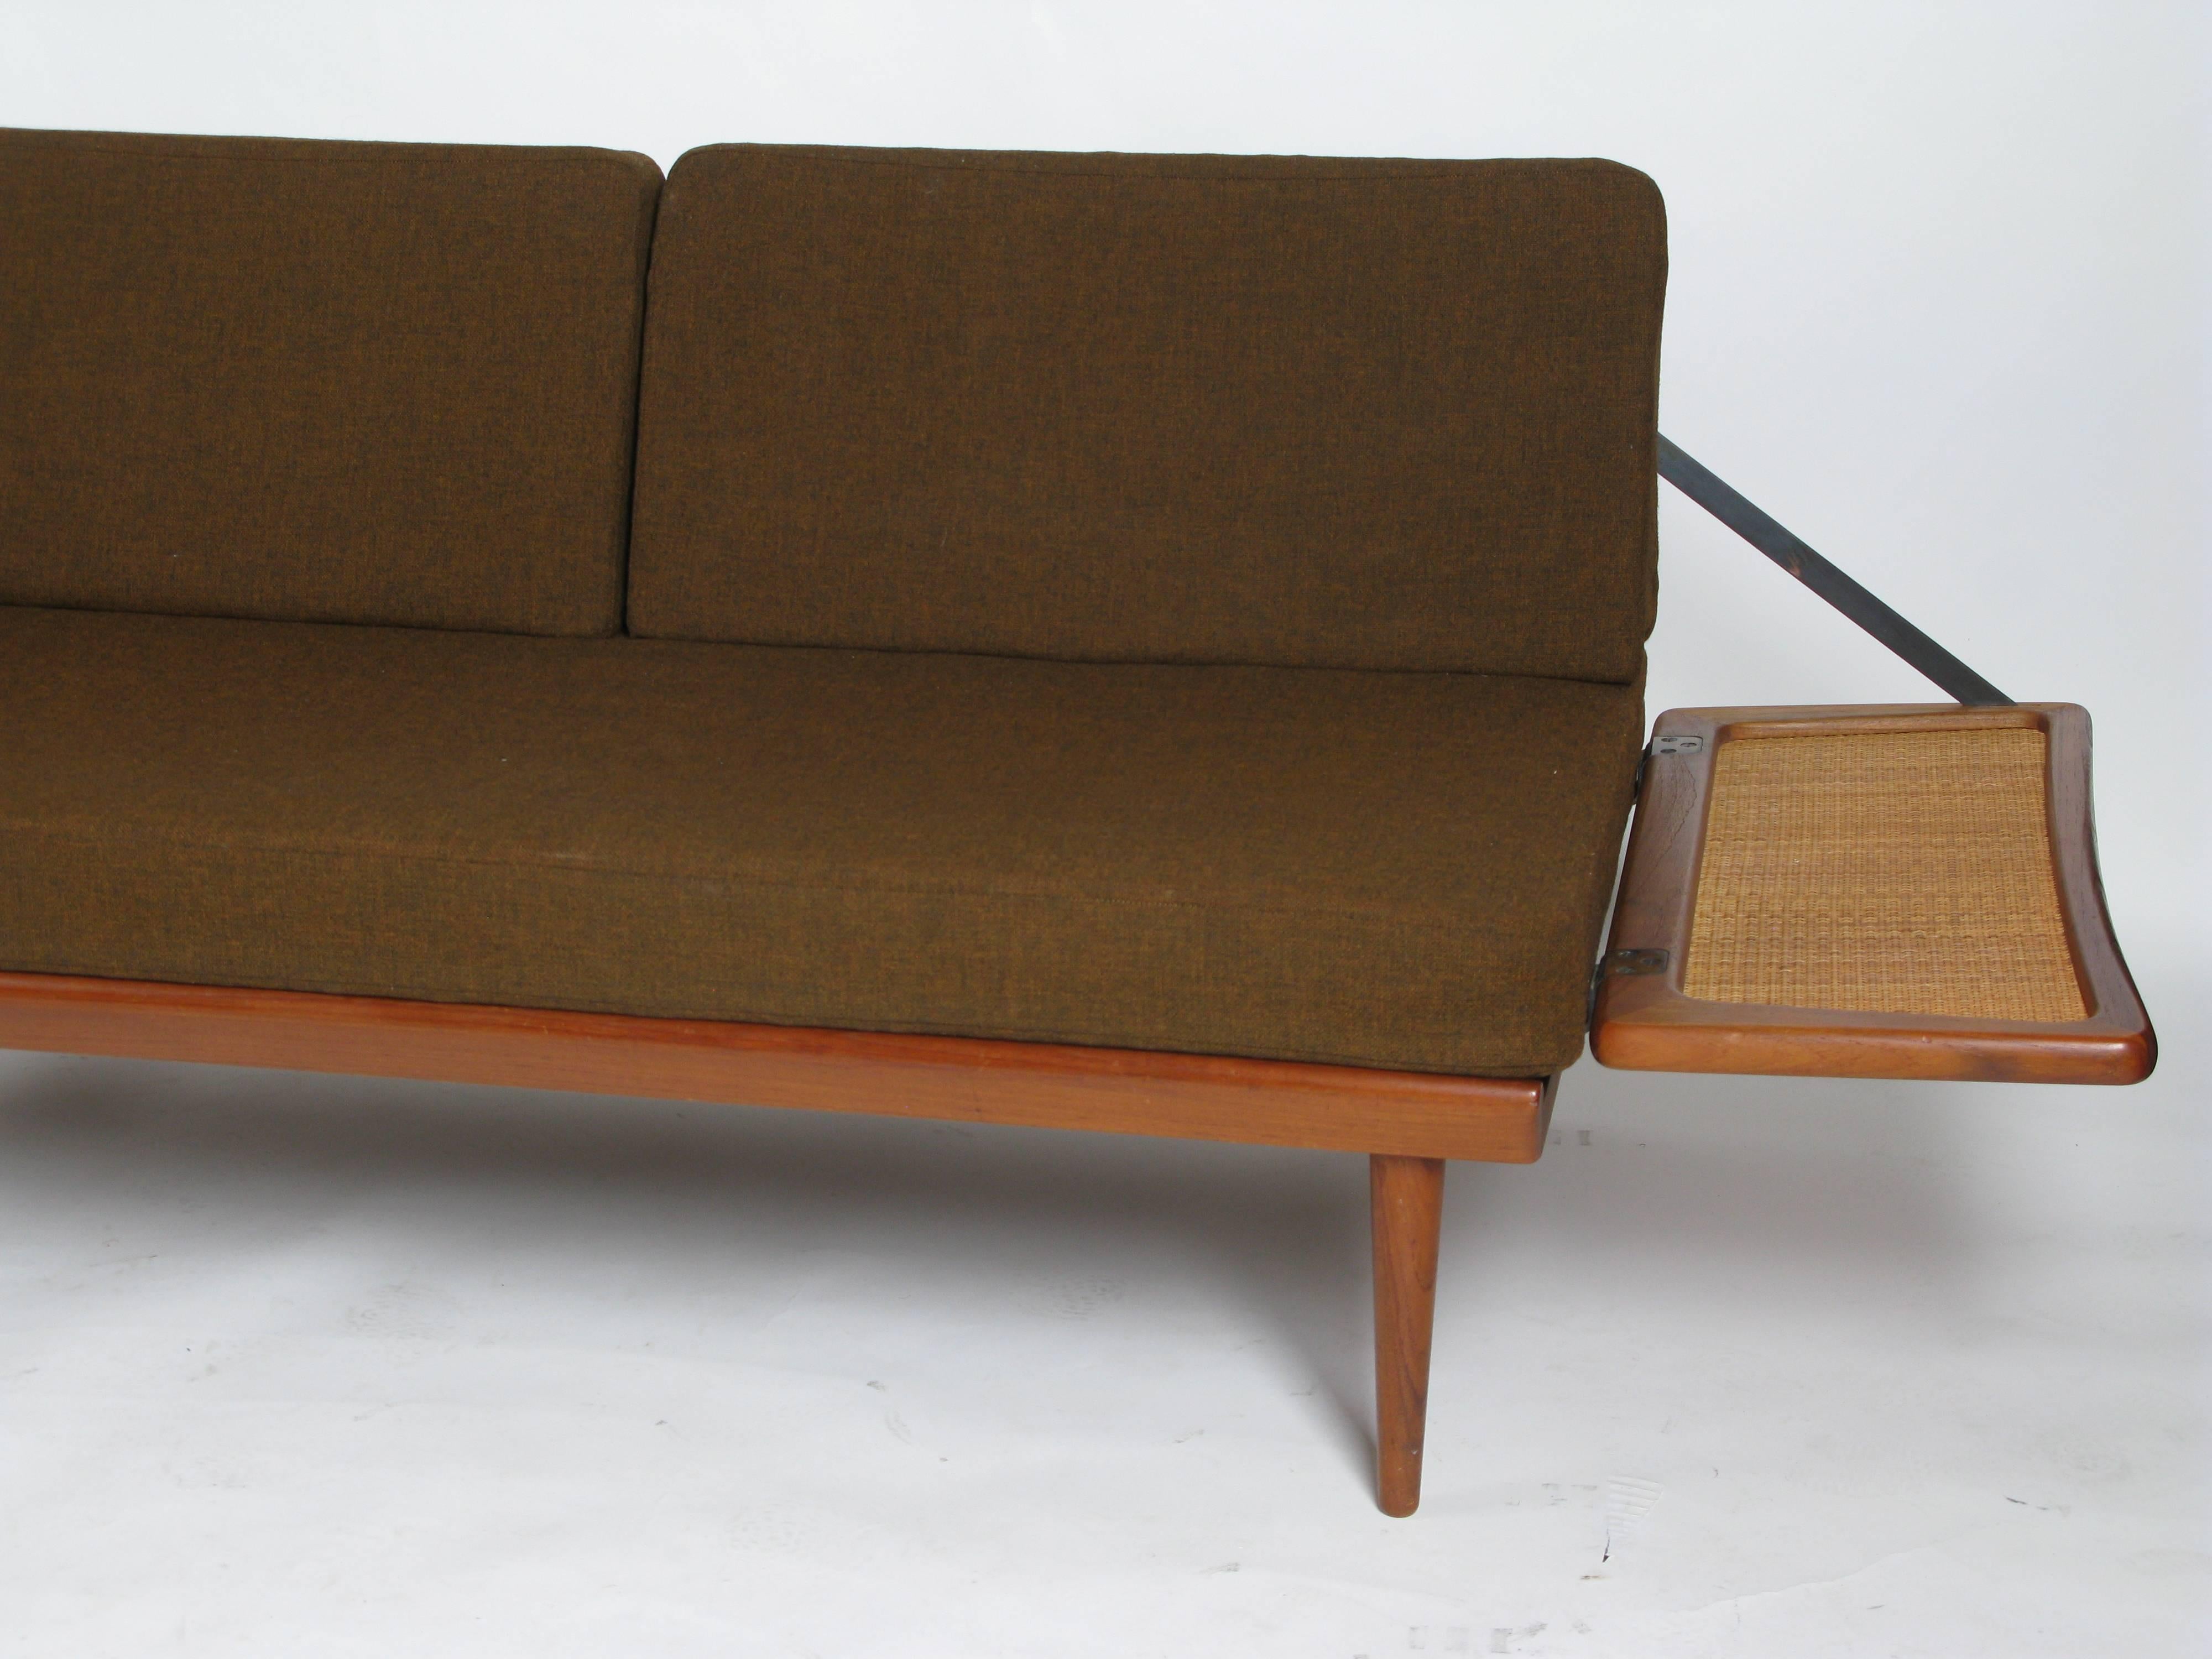 Cane Peter Hvidt Convertible Sofa Daybed in Stunning Original Condition